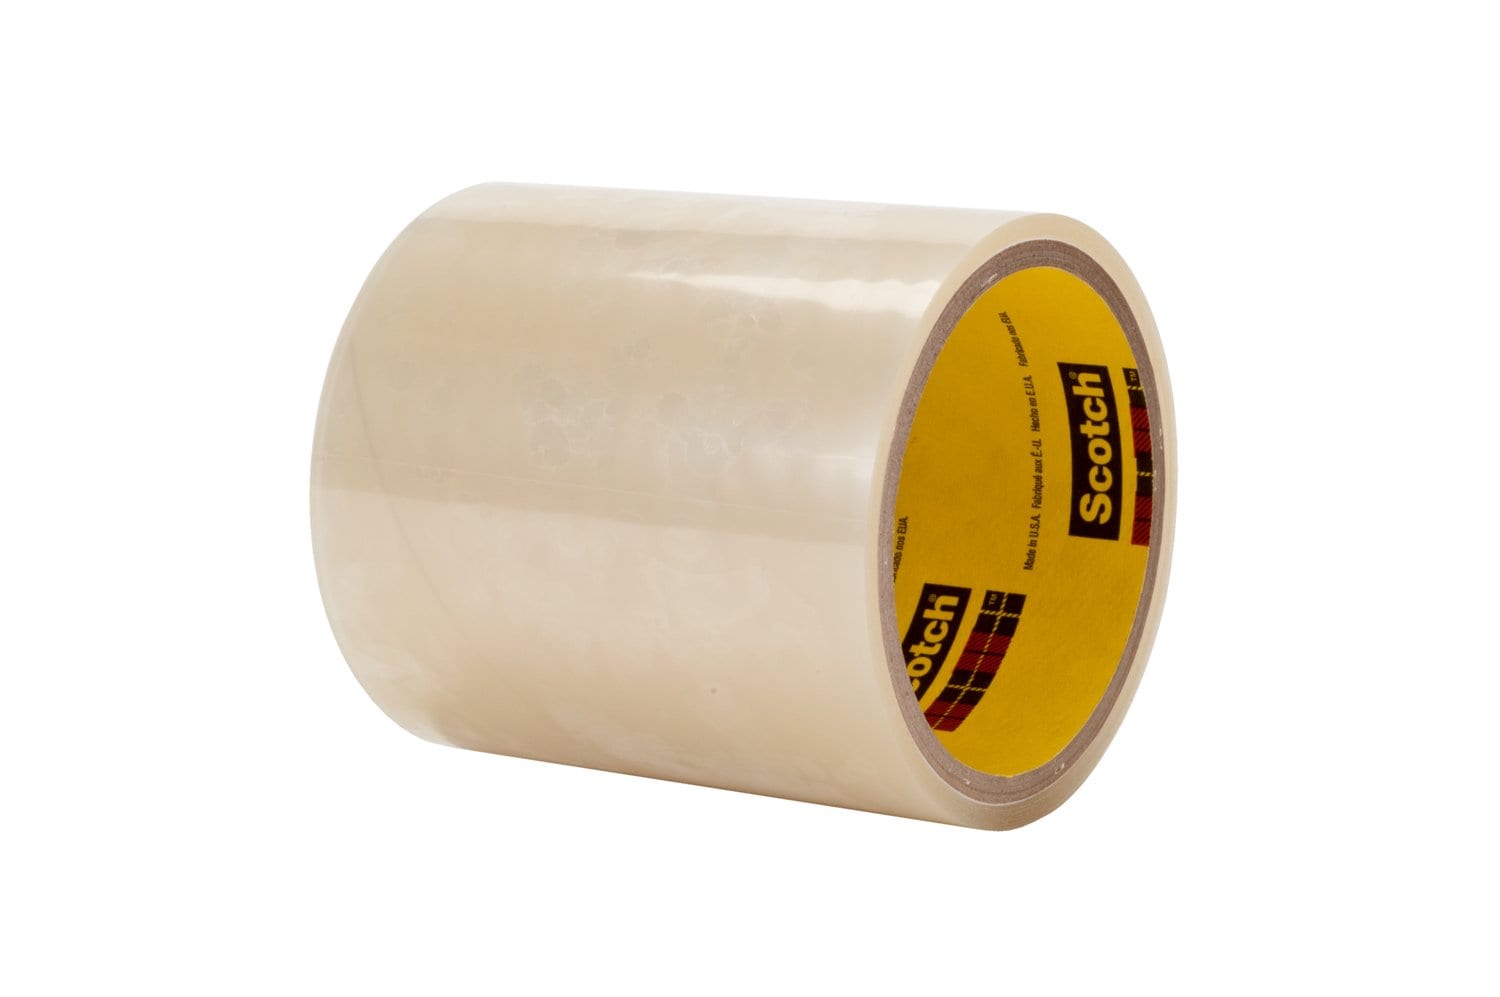 7000029110 - 3M Adhesive Transfer Tape 467MC, Clear, 48 in x 60 yd, 2 mil, 1 roll
per case